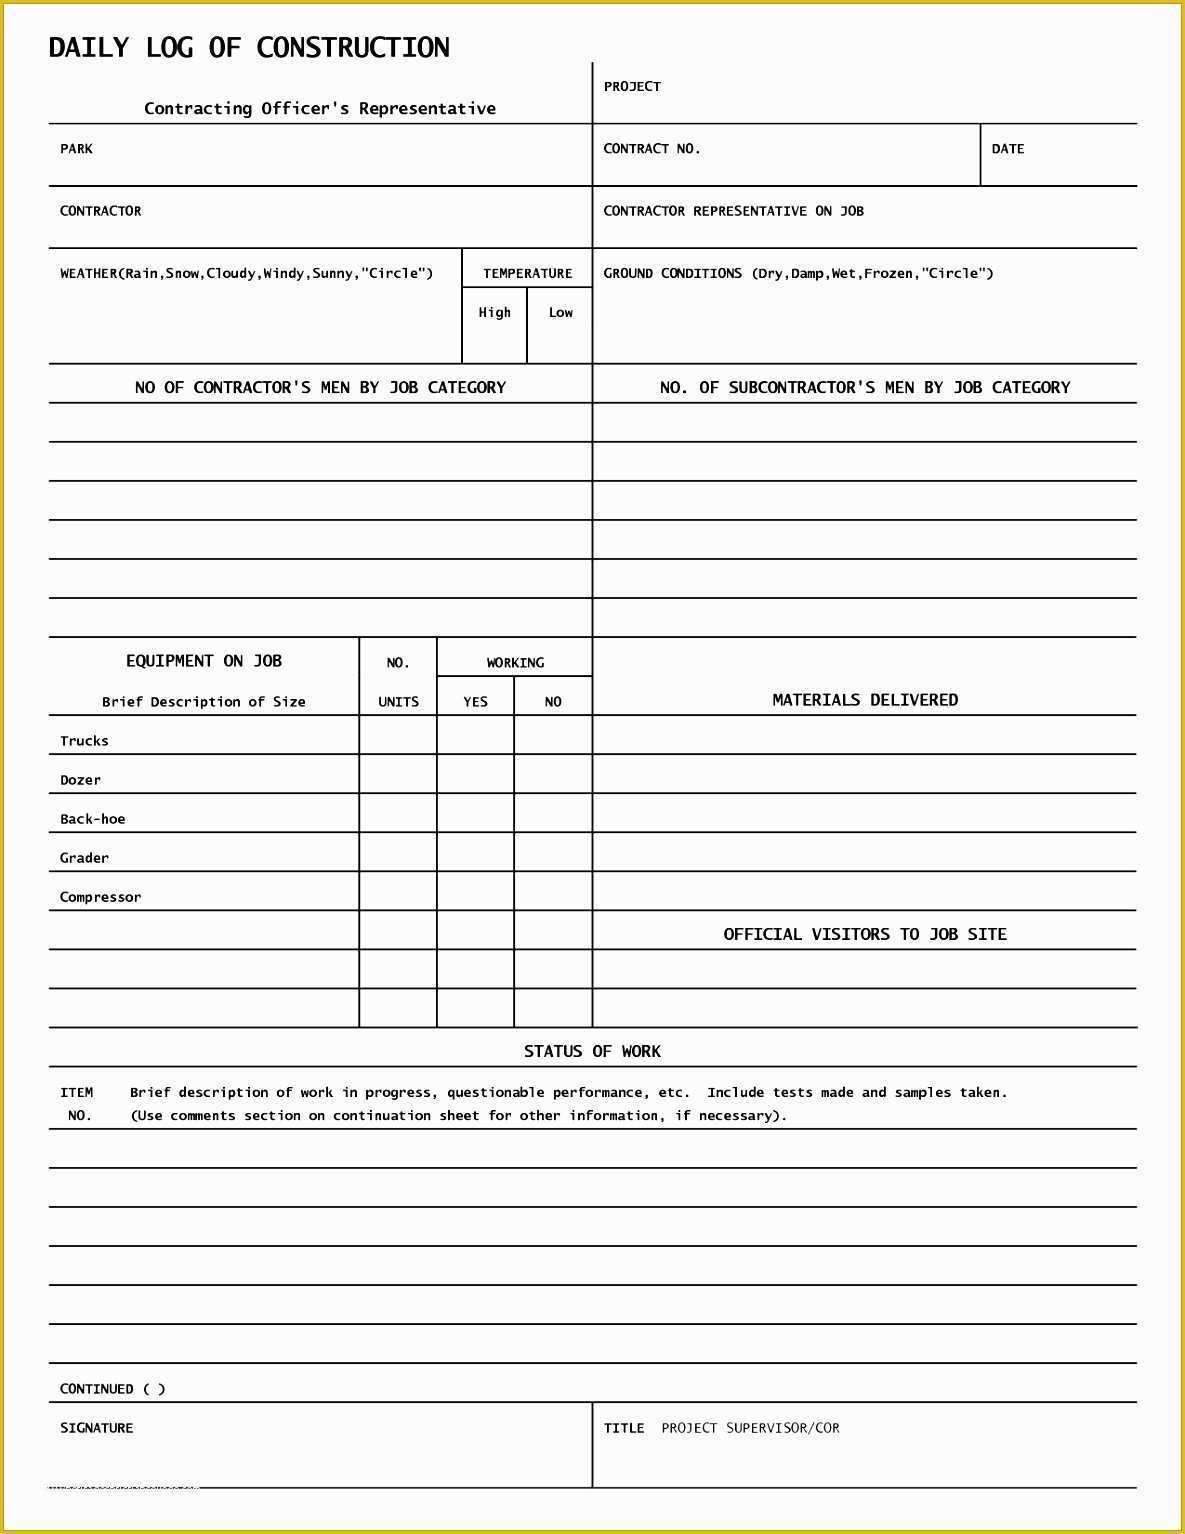 Daily Construction Log Template Free Of Daily Construction Log Template 29 Construction